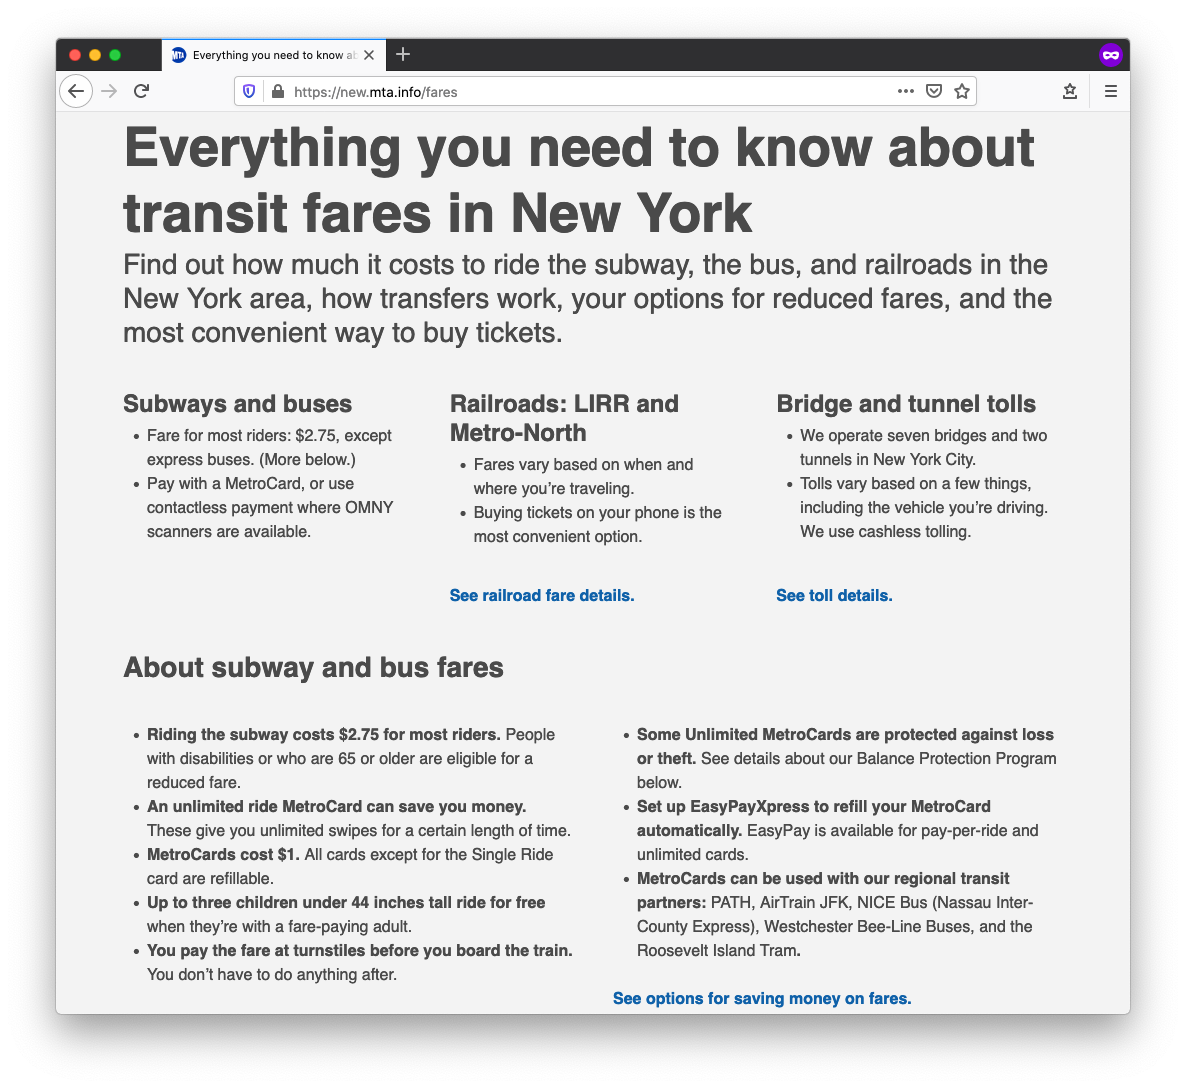 A screenshot of a webpage called “Everything you need to know about transit fares in New York.” There are sections at the top with bold subheads and bulleted lists. These show general fare and toll information, organized by mode of transit: subways and buses, railroads, and bridges and tunnels.